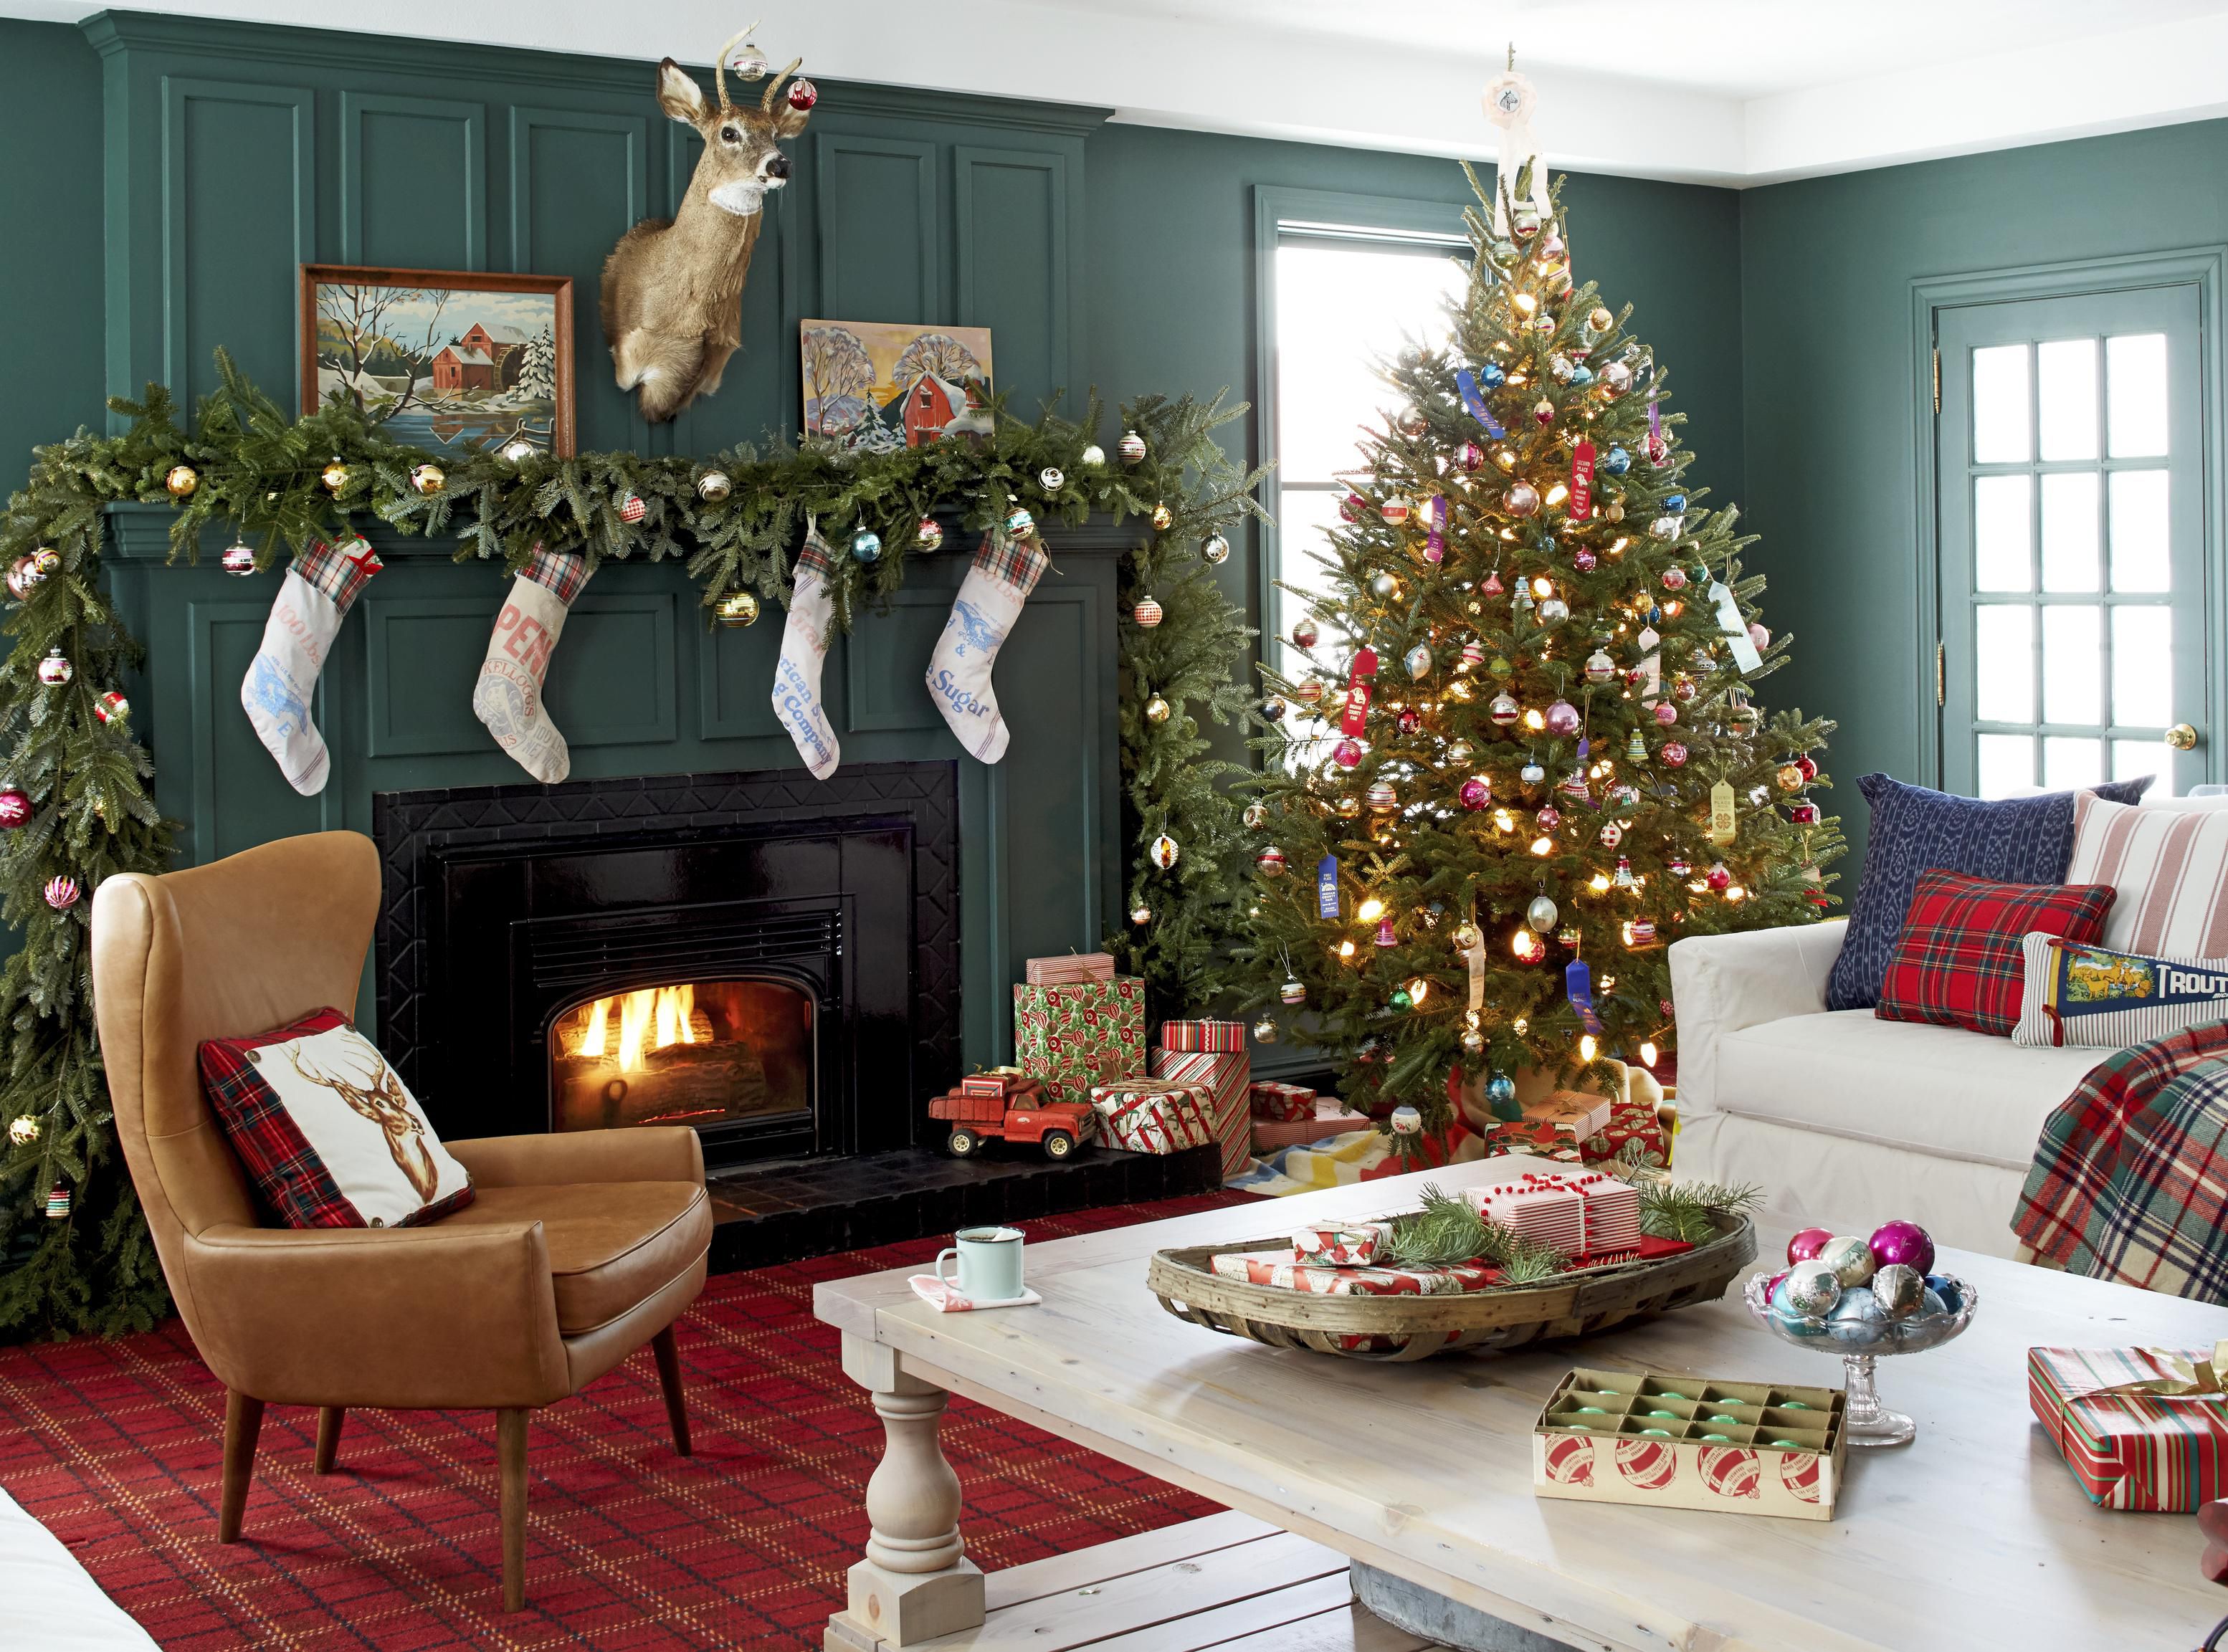 25 Christmas Living Room Decorating Ideas How To Decorate A For